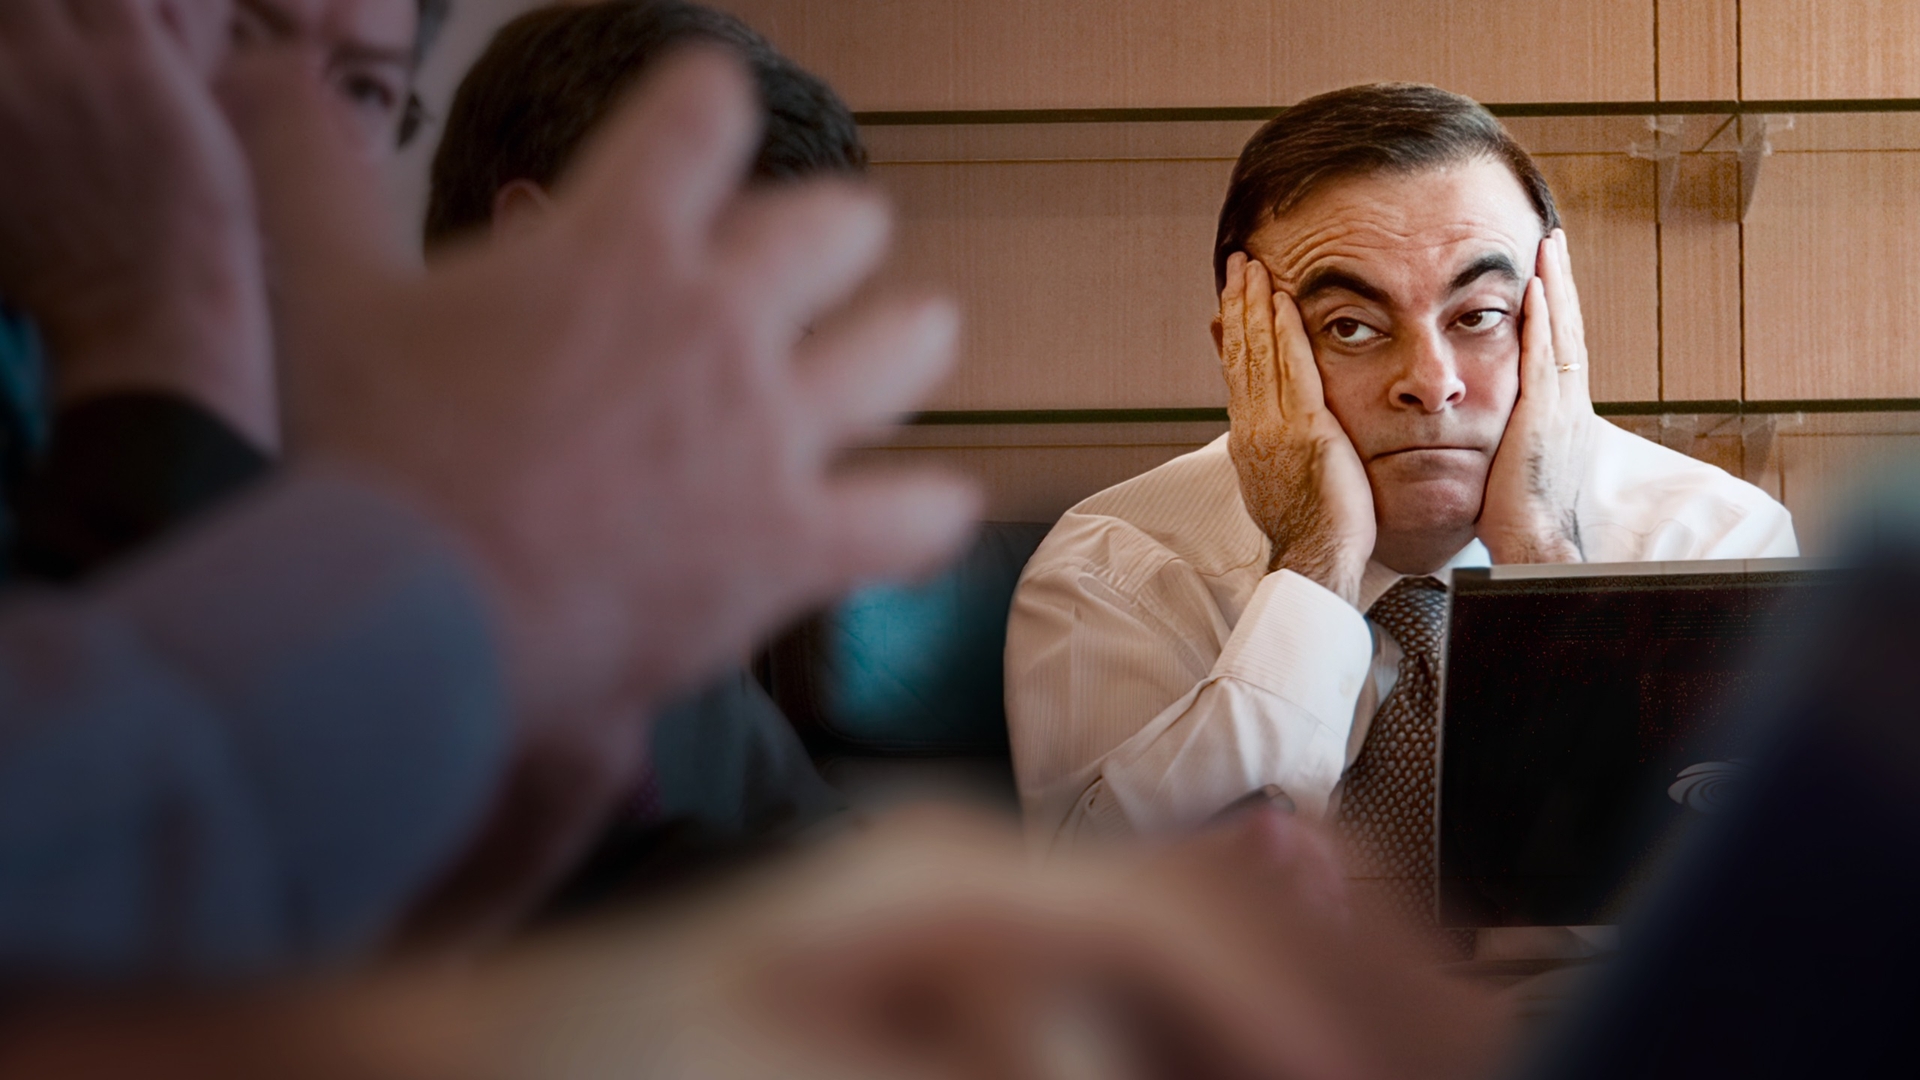 Fugitive: The Curious Case of Carlos Ghosn